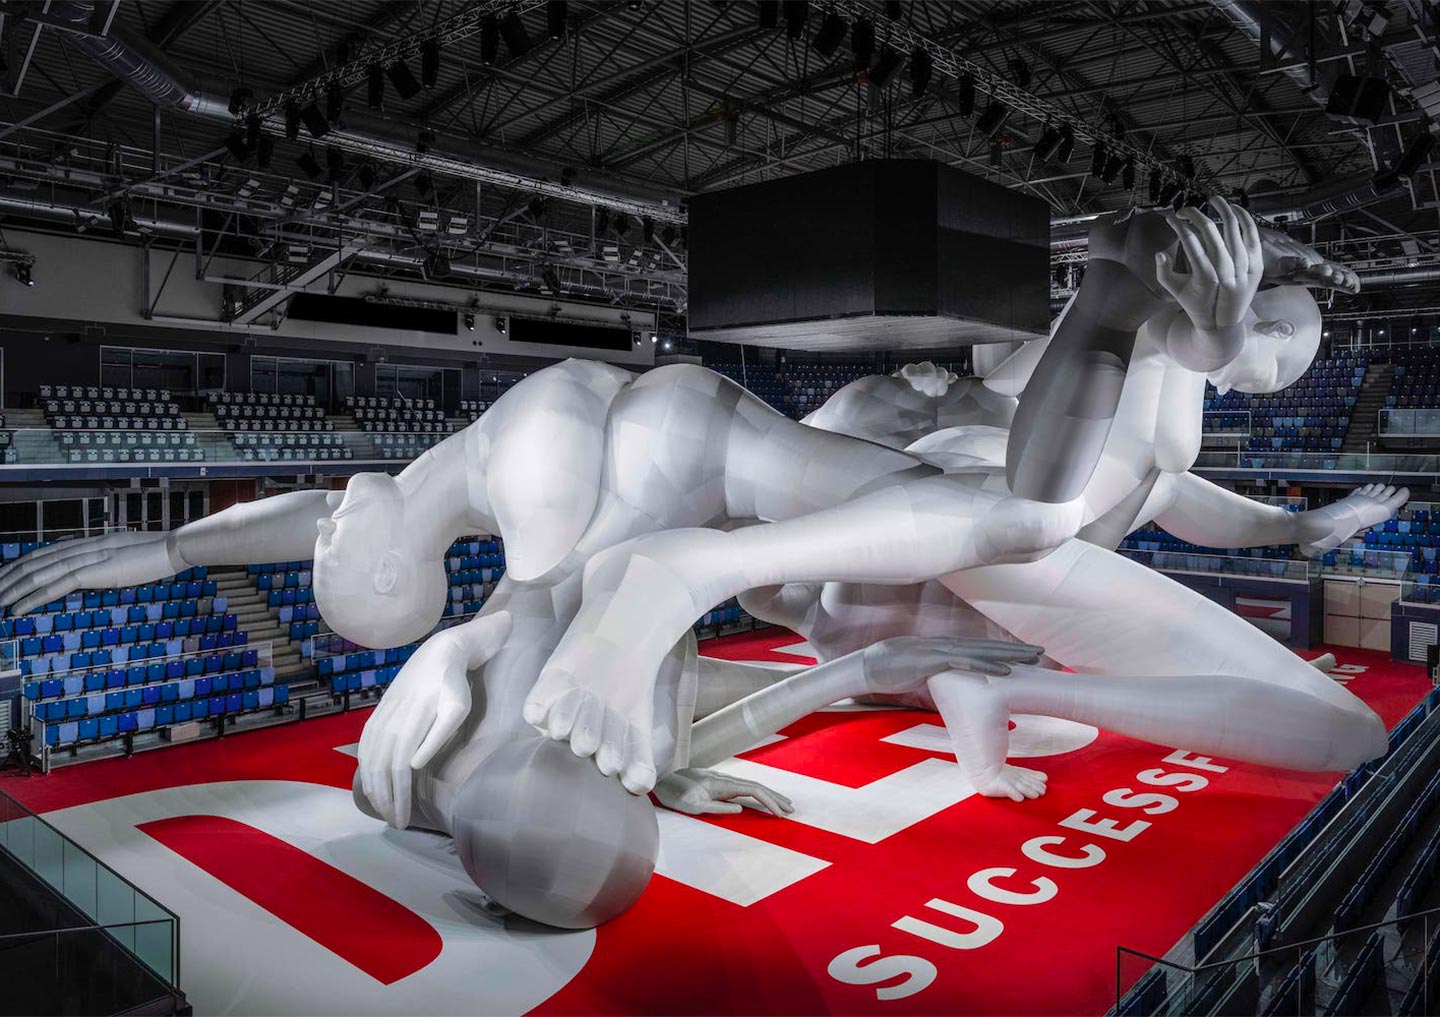 The Diesel spring-summer 2023 show took place in a room full of massive, vaguely sexual inflatable sculptures